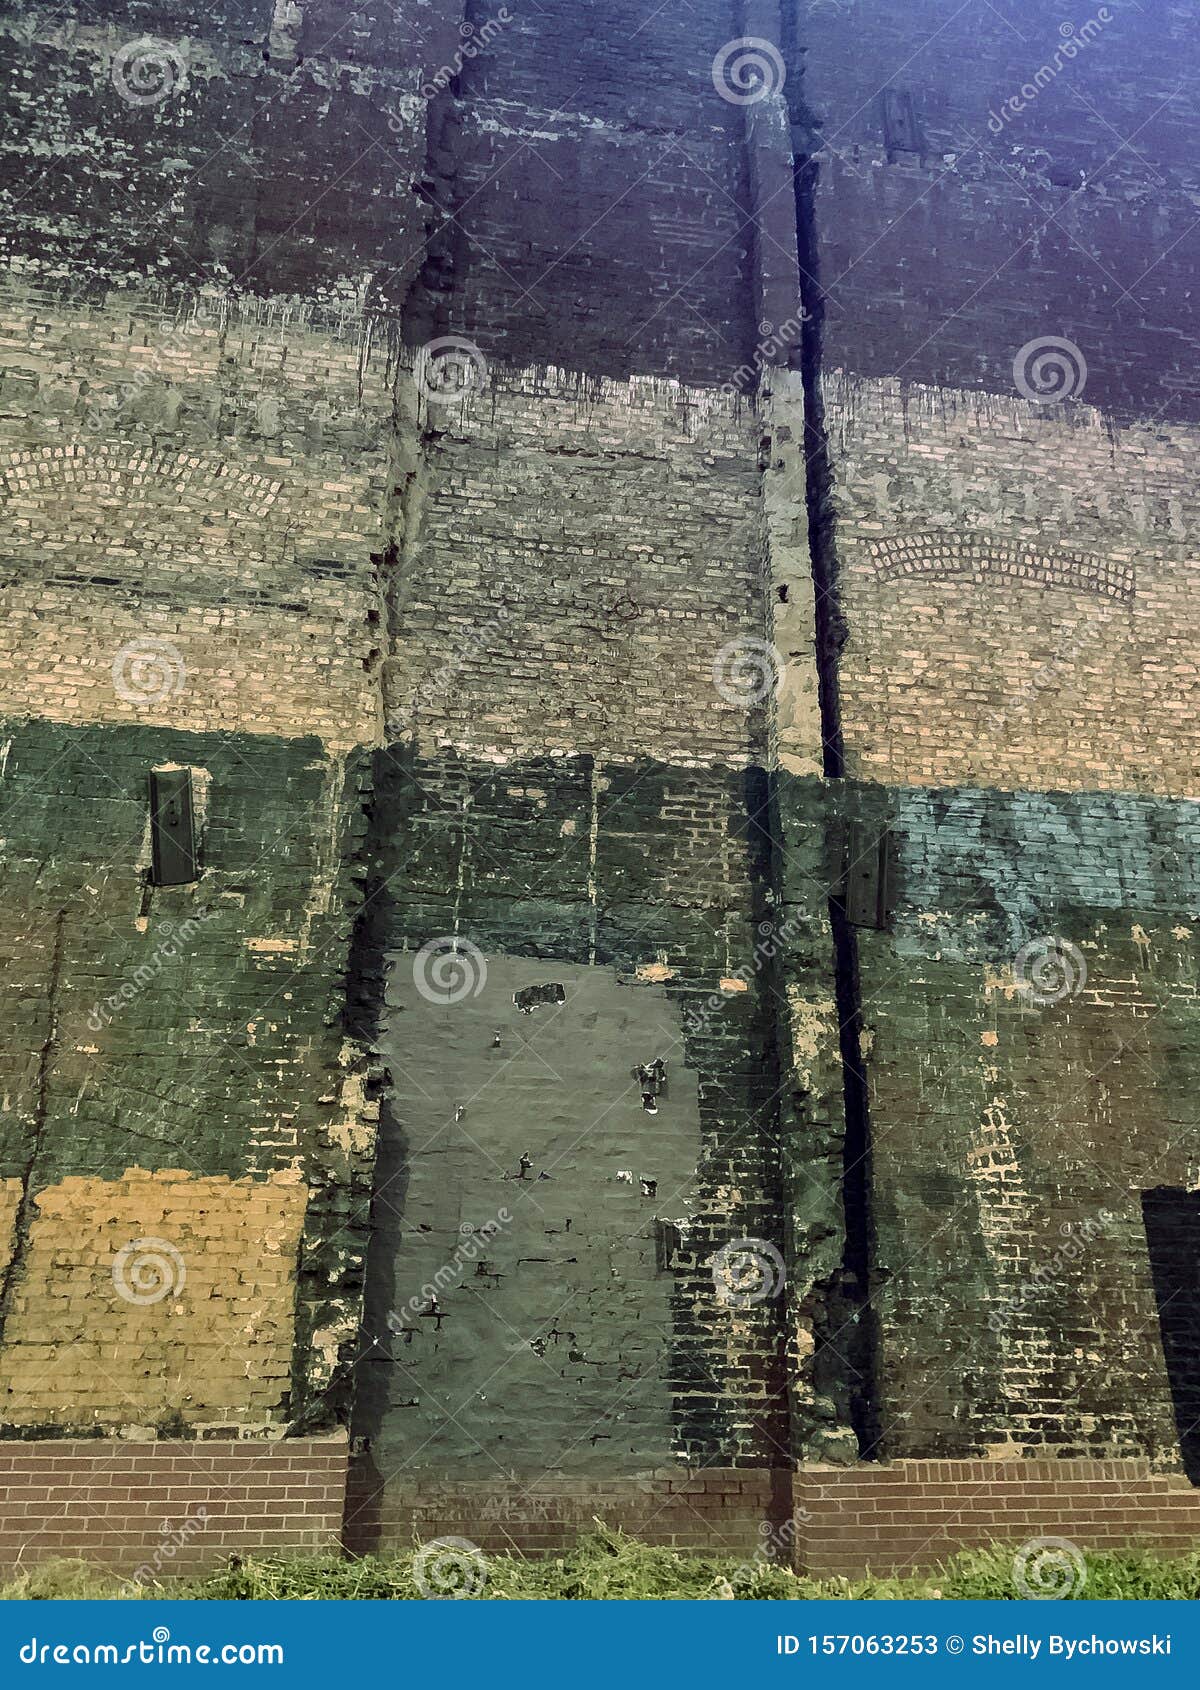 creepy old, abandoned building with painted over bricks in downtown chicago loop